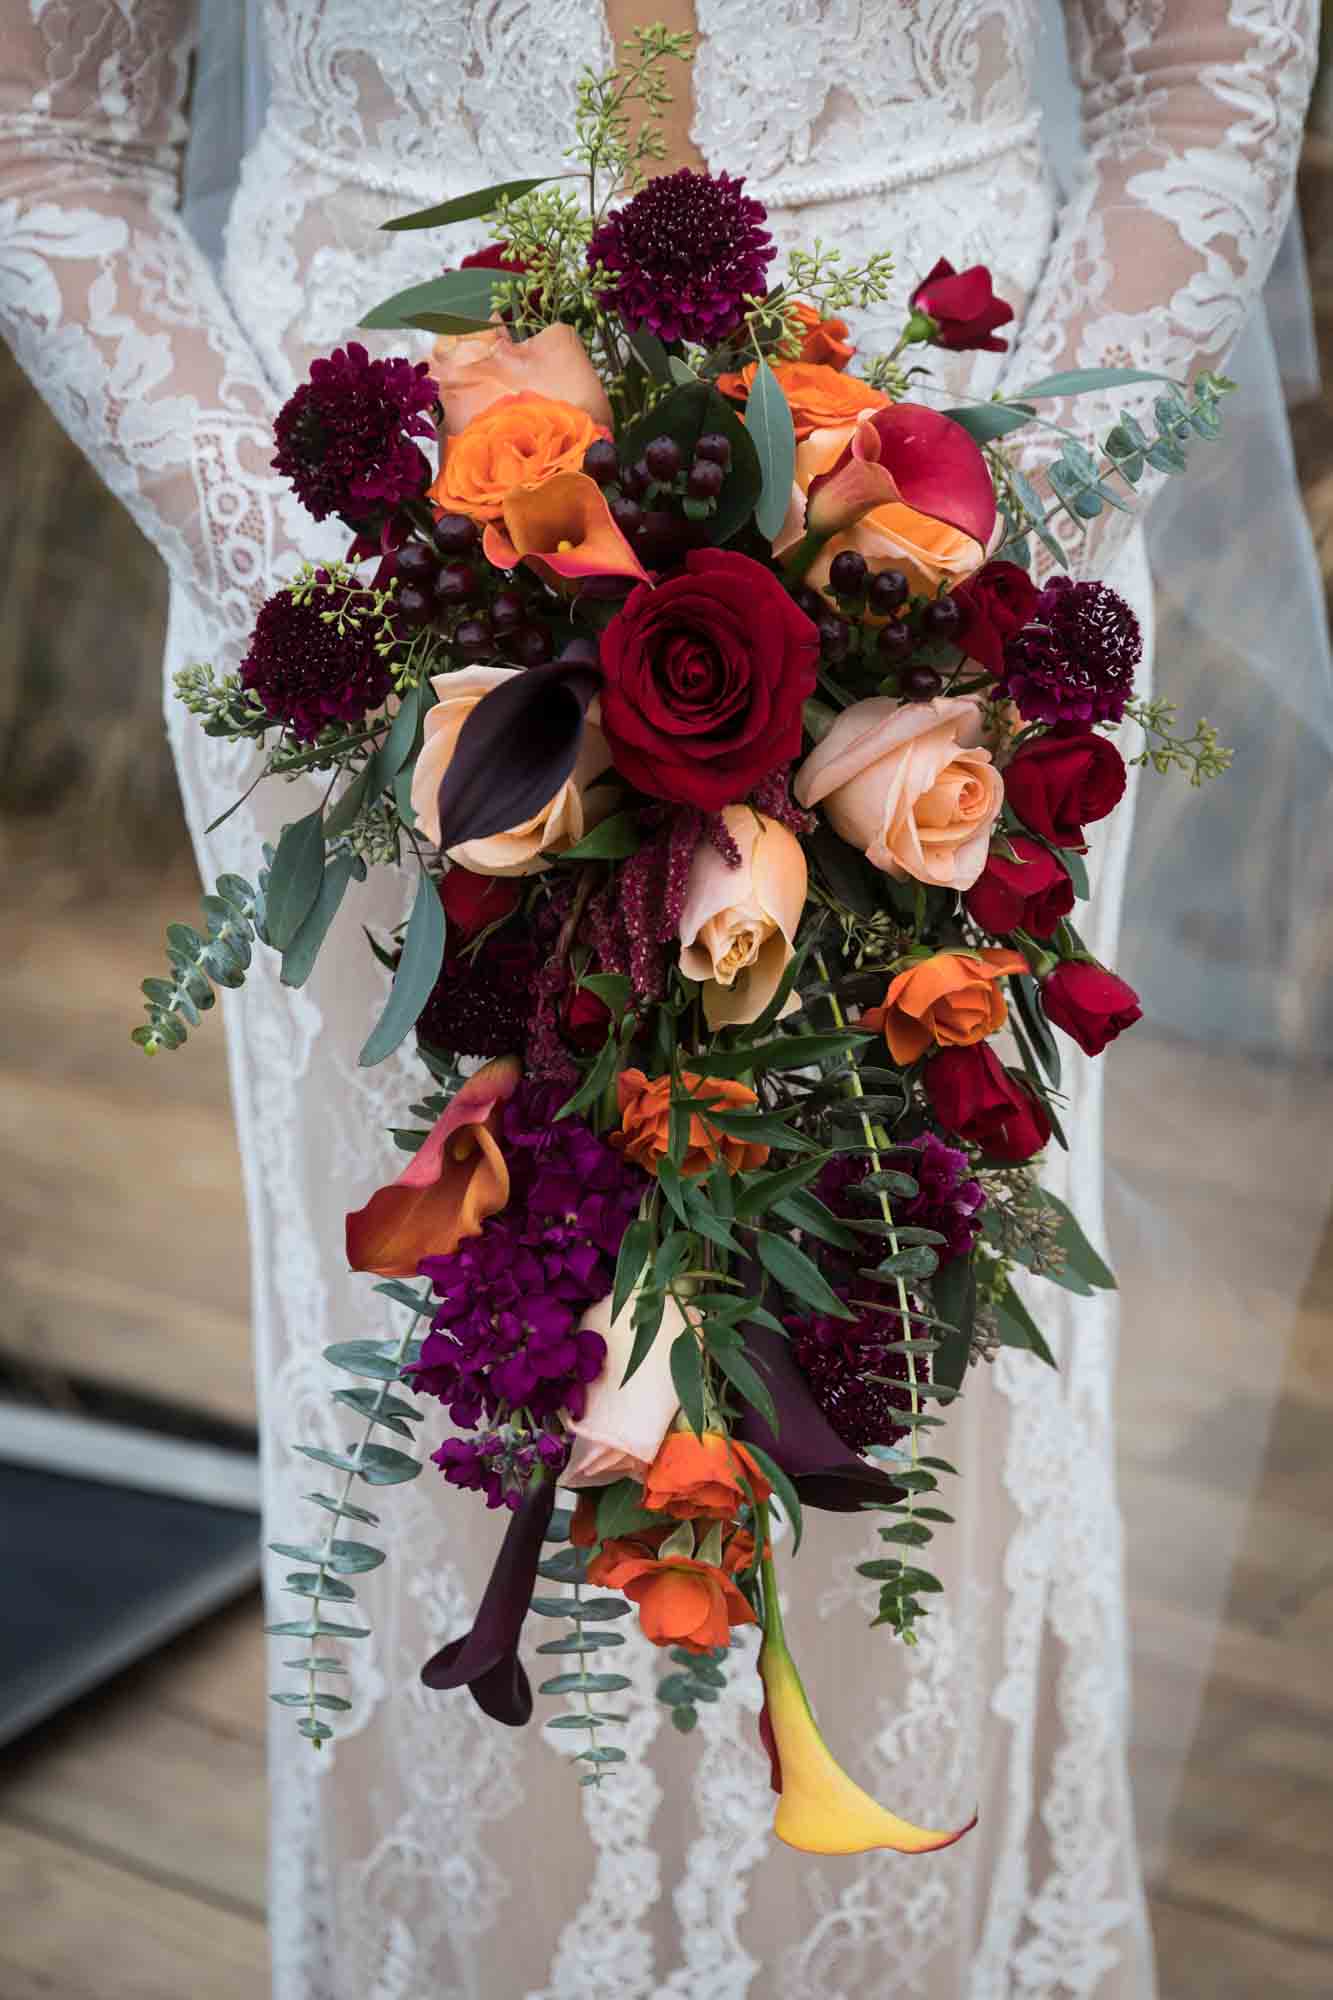 Close up on bride holding red and orange flower bouquet